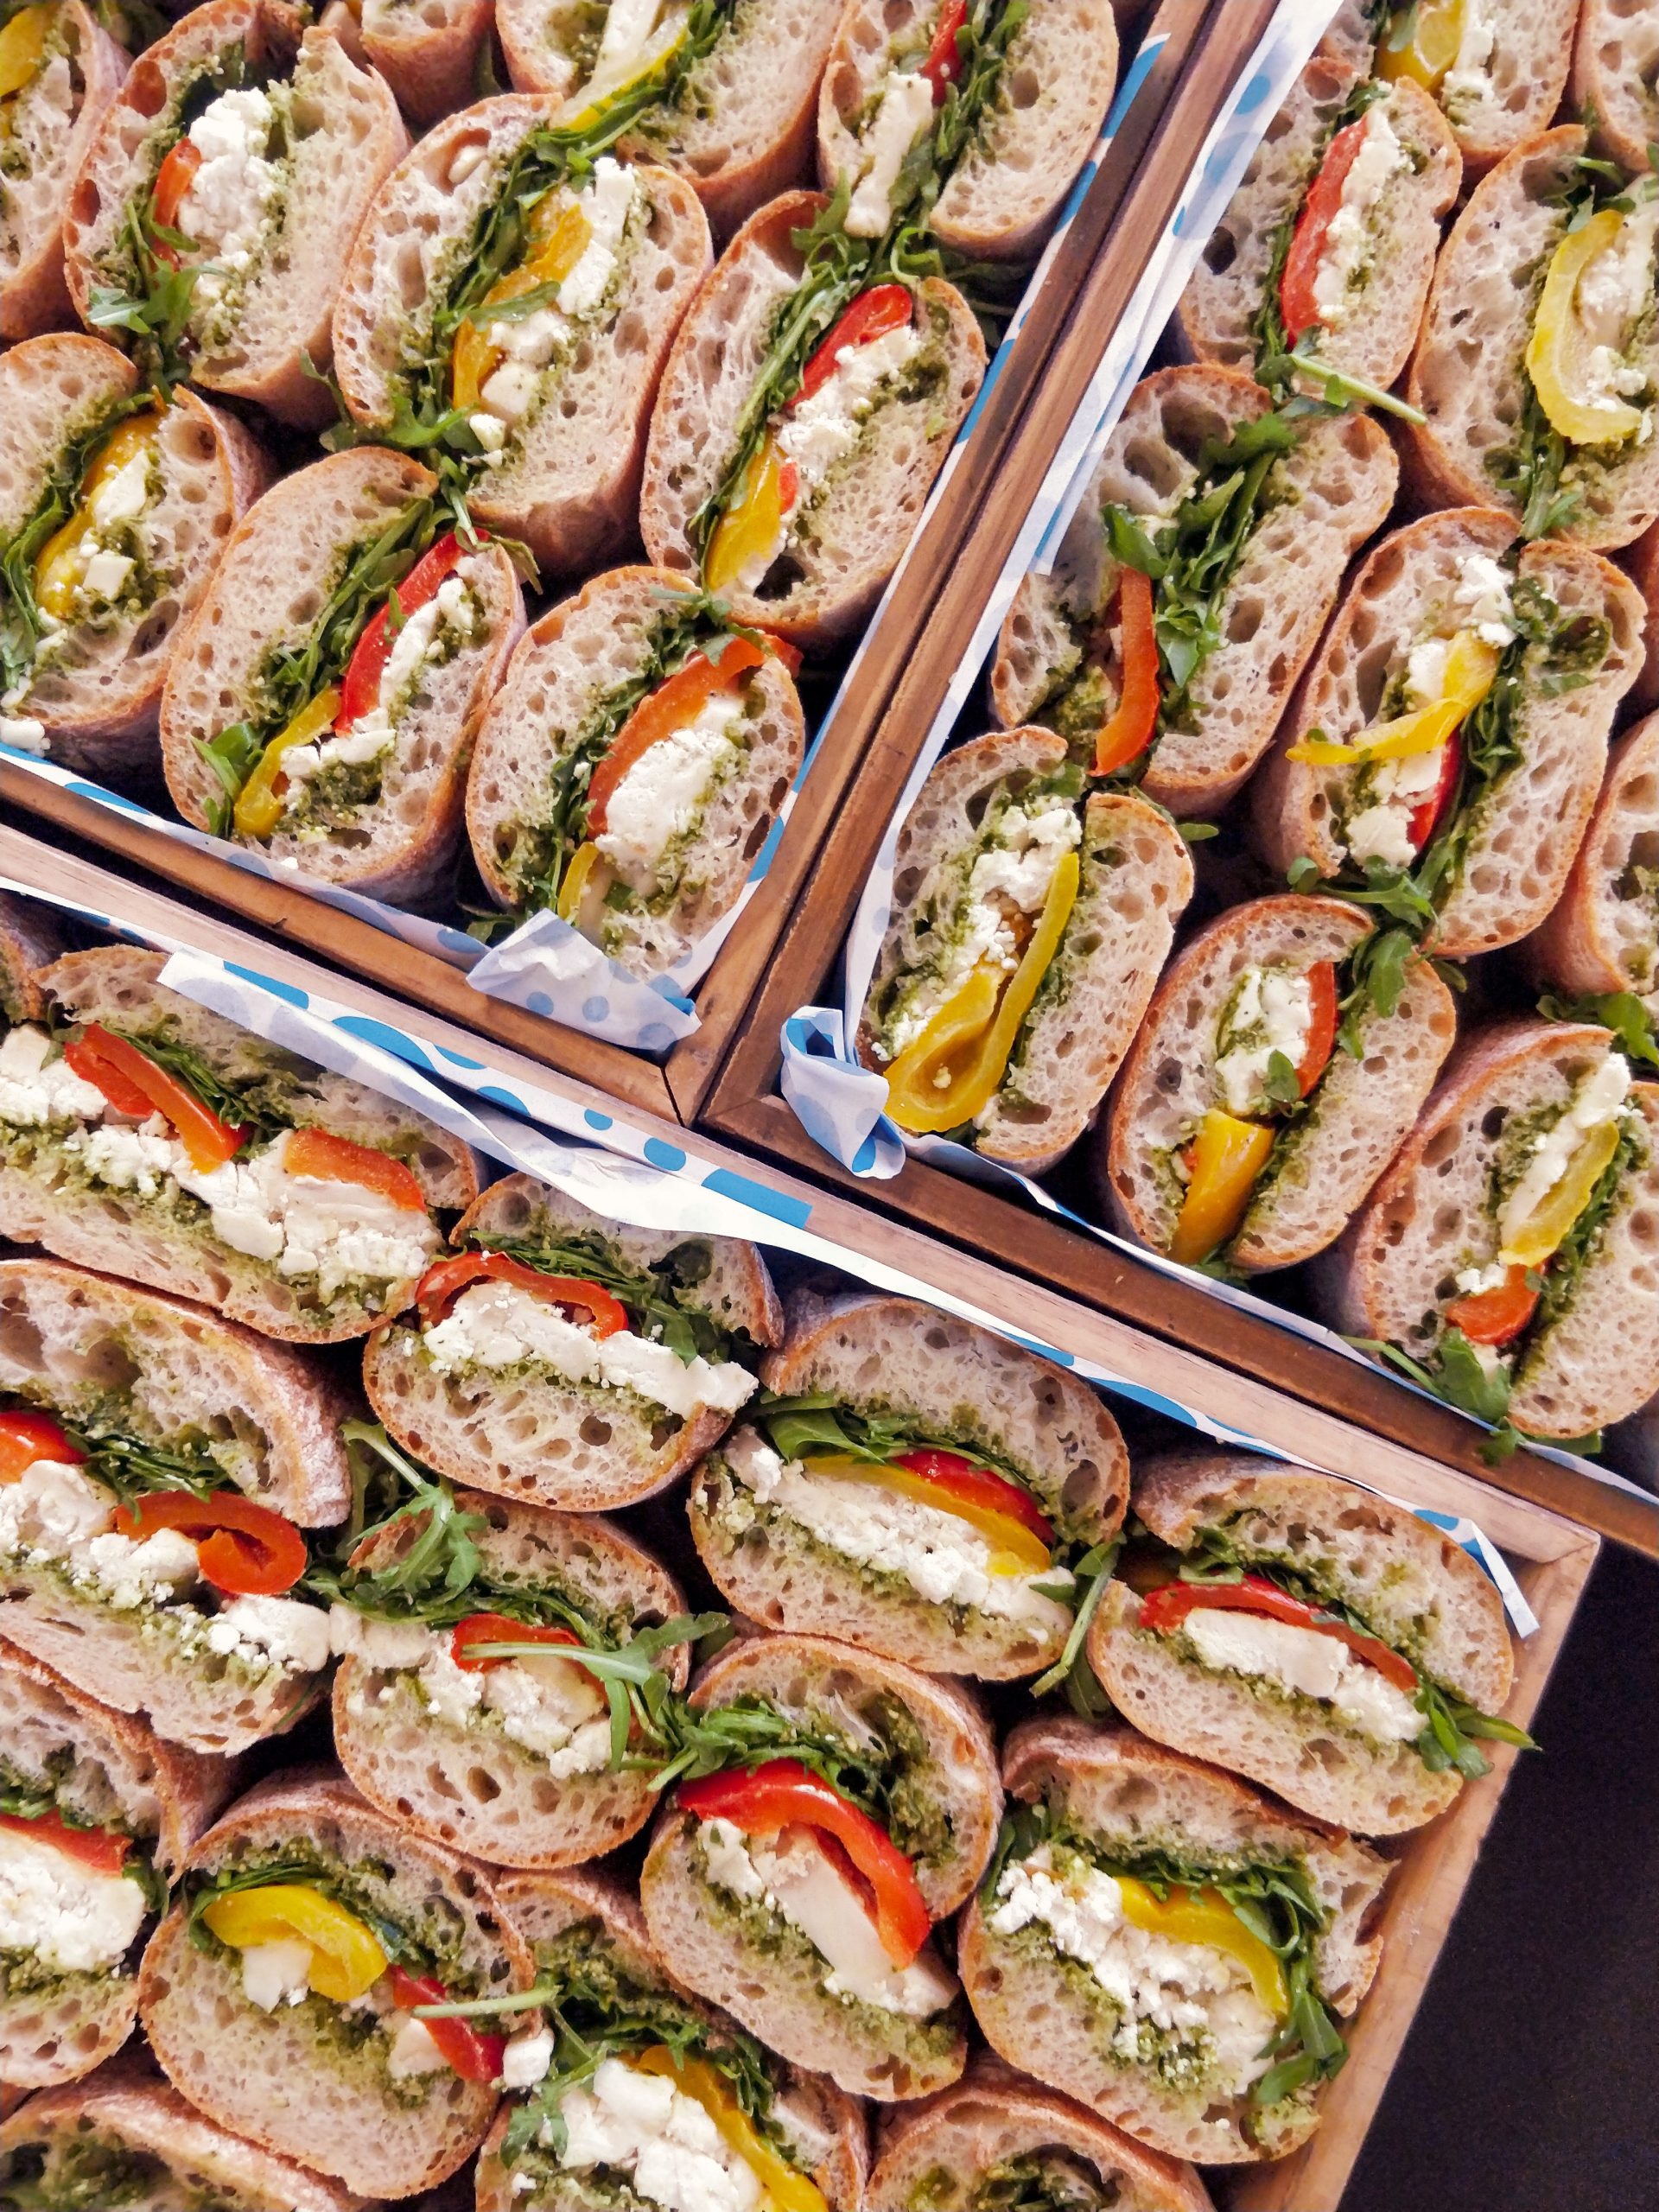 How to choose the perfect caterer for your lunch meeting